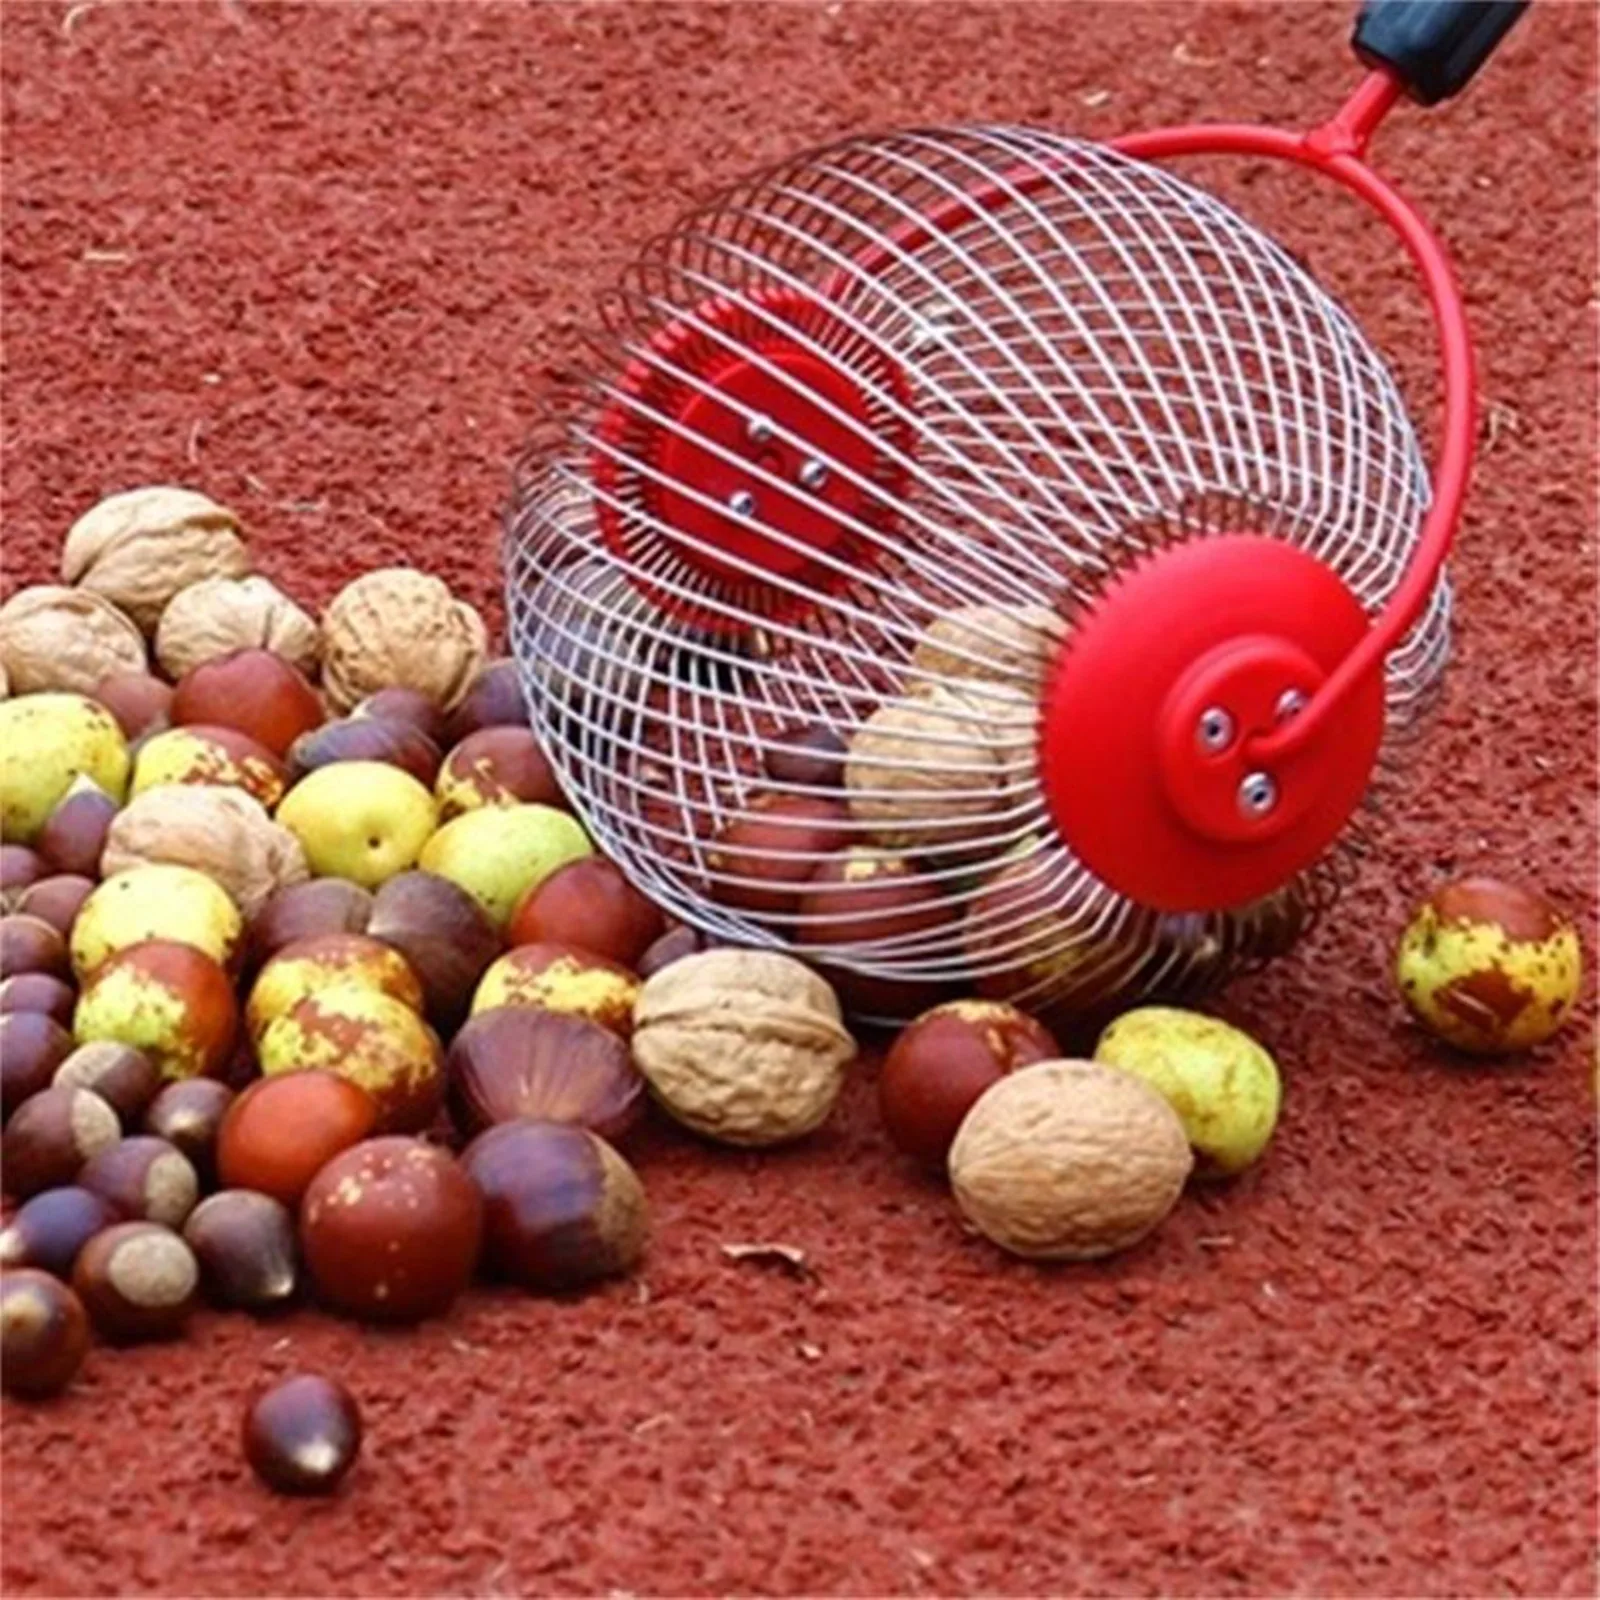 

Ball Collector Rolling Nut Harvester Ball Picker Adjustable Outdoor Manual Tools Picker Collector Walnuts Pecans Crab Apples